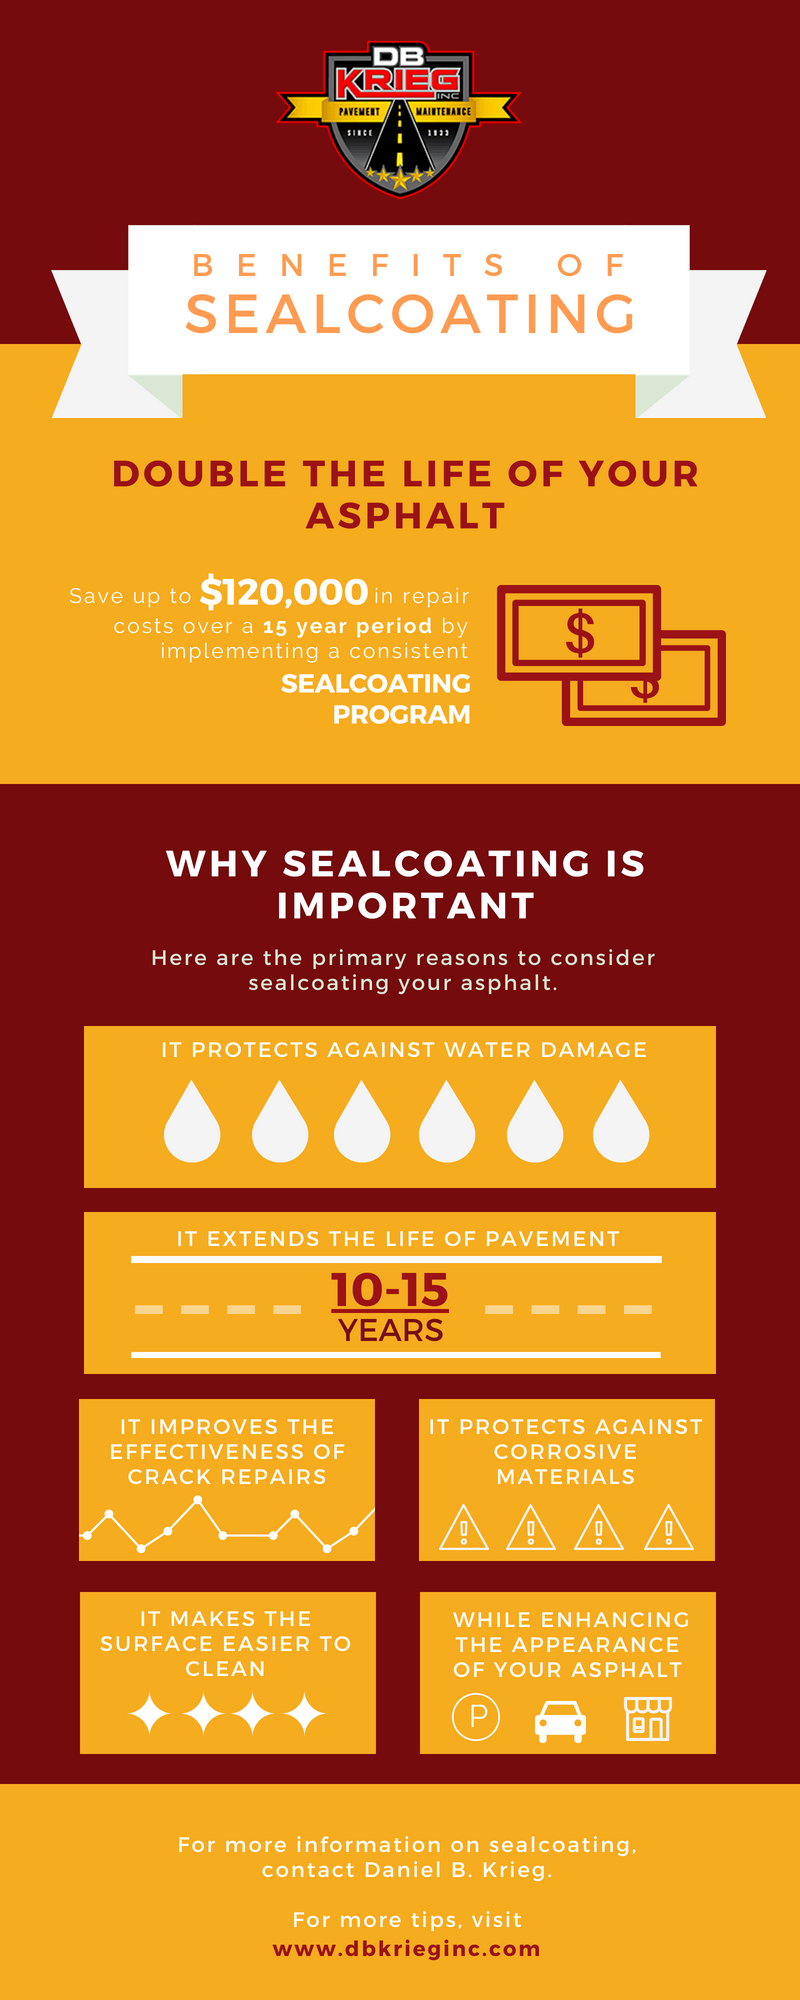 Why Sealcoating is Important